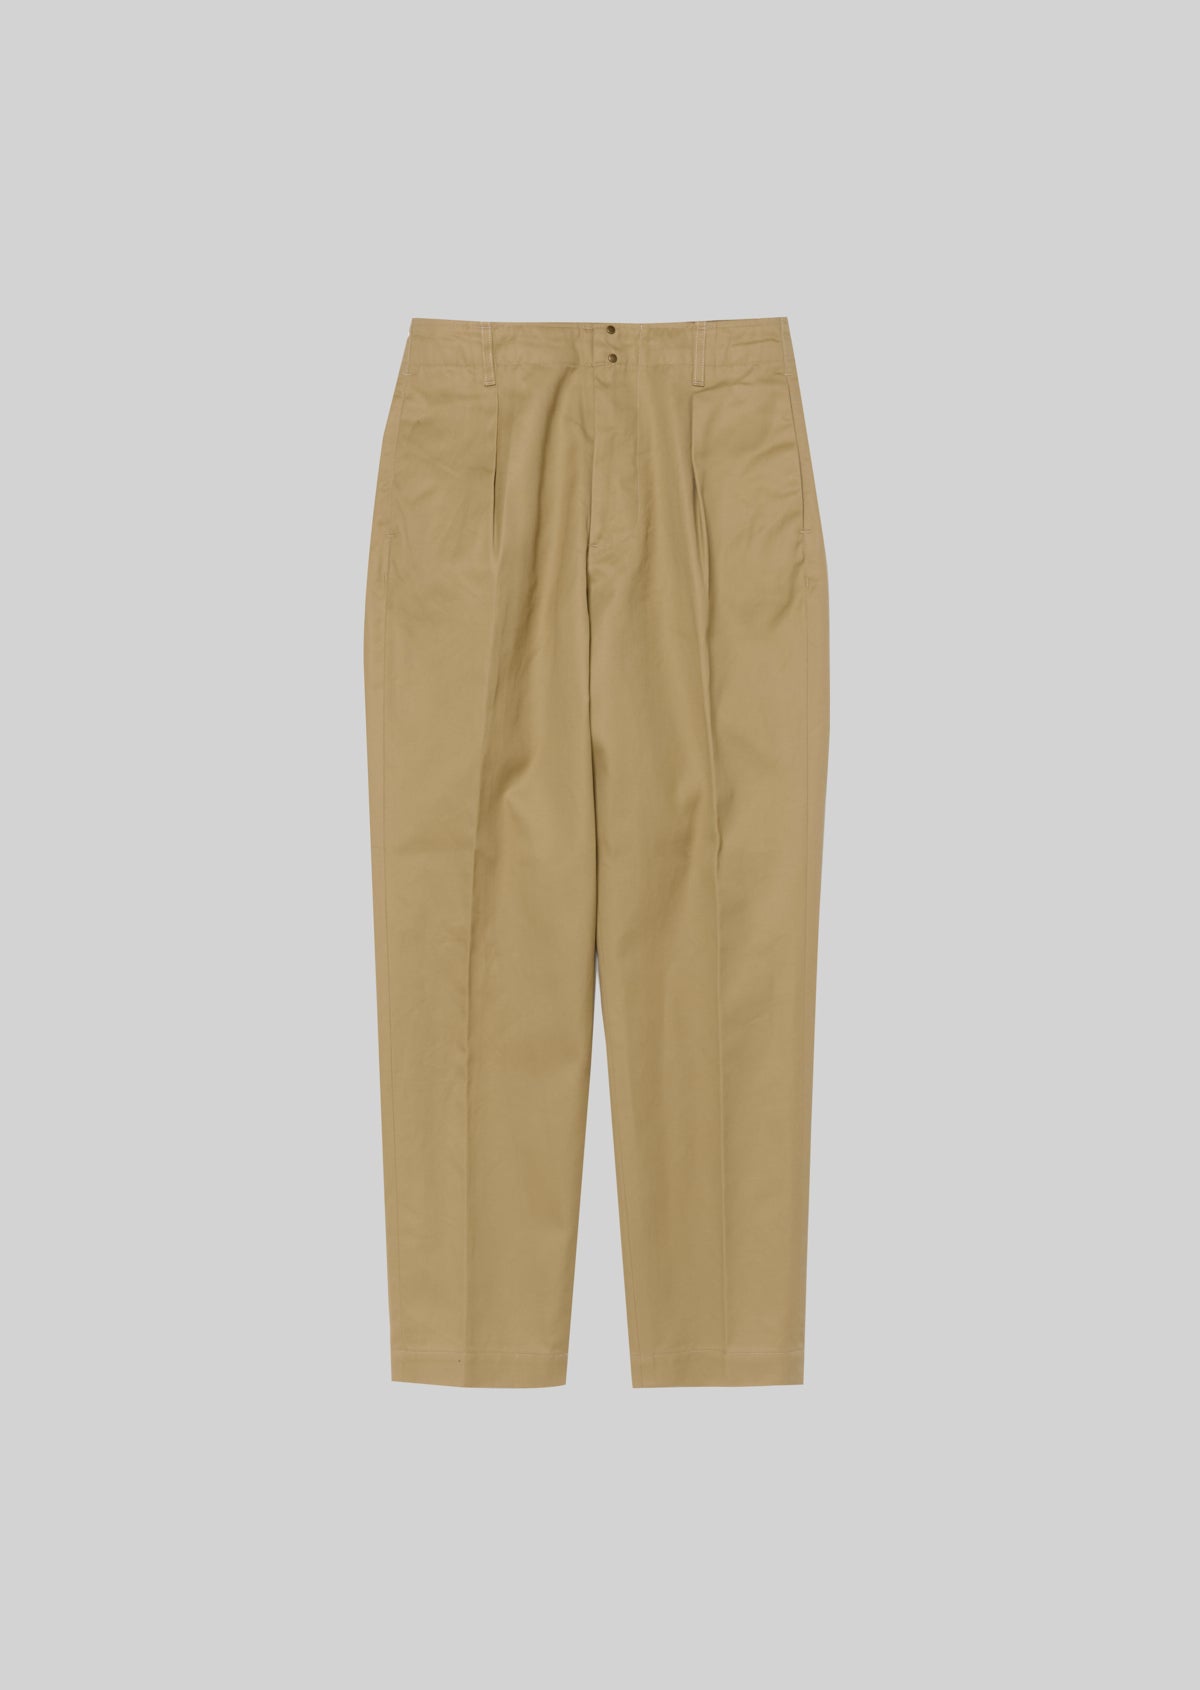 CHINO TROUSERS BEIGE　8281-1400